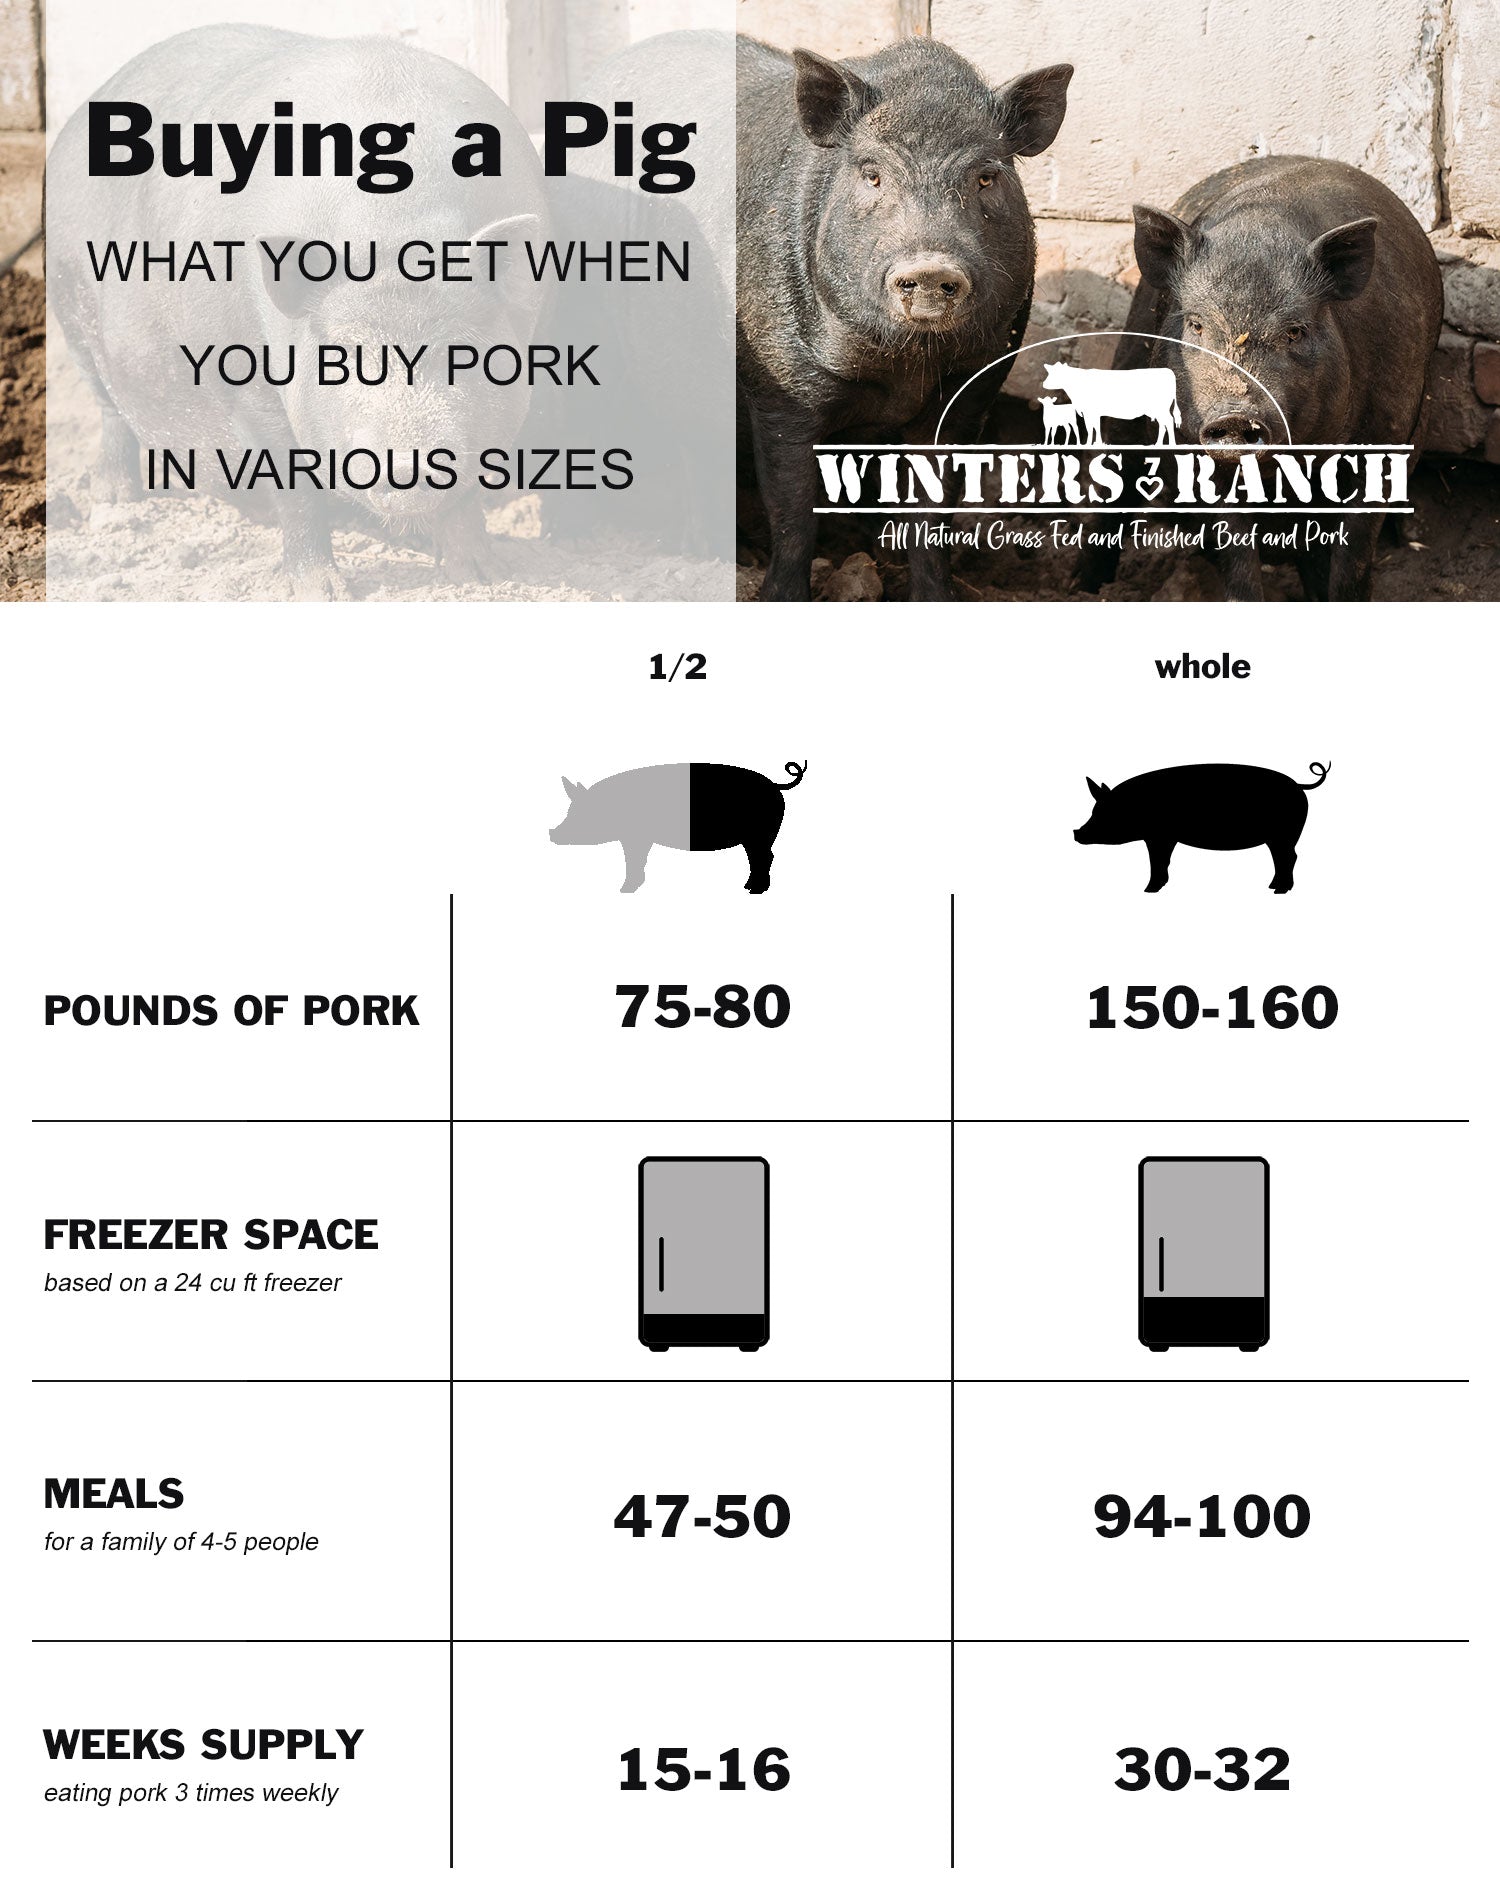 image that shows how much pork purchasing a half or whole pig will give you